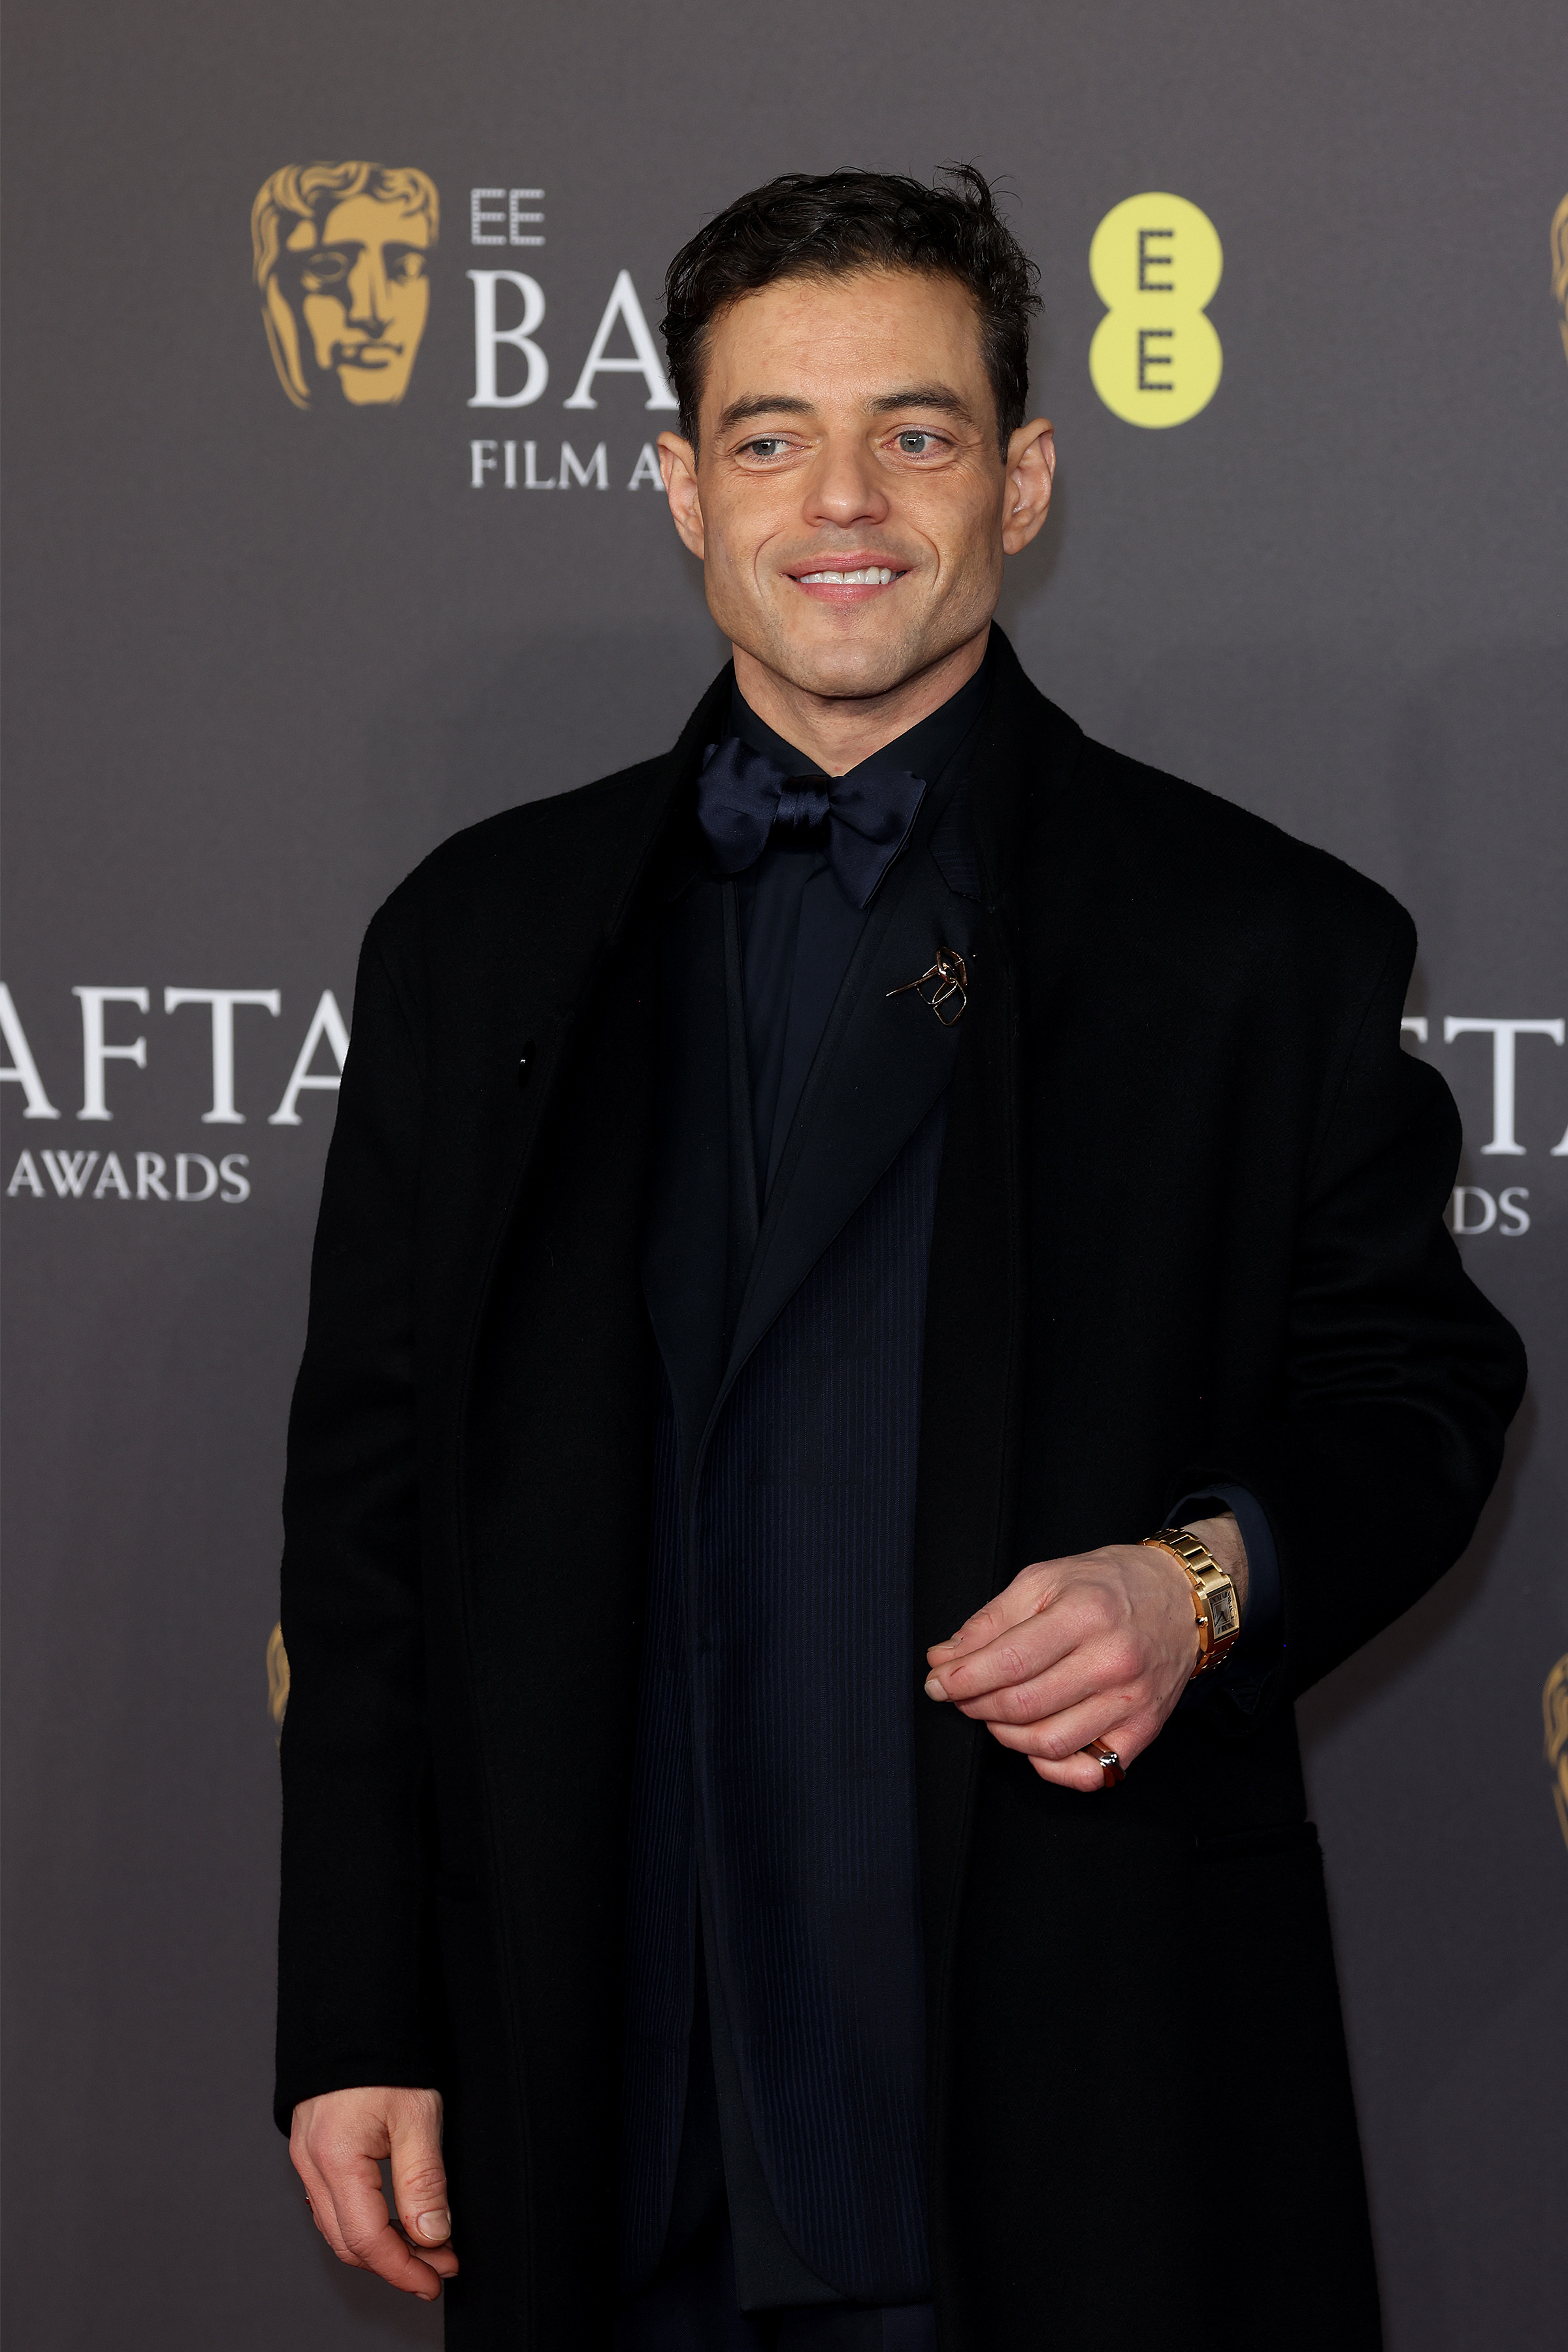 Rami Malek in a black tuxedo with a bow tie at the BAFTA awards